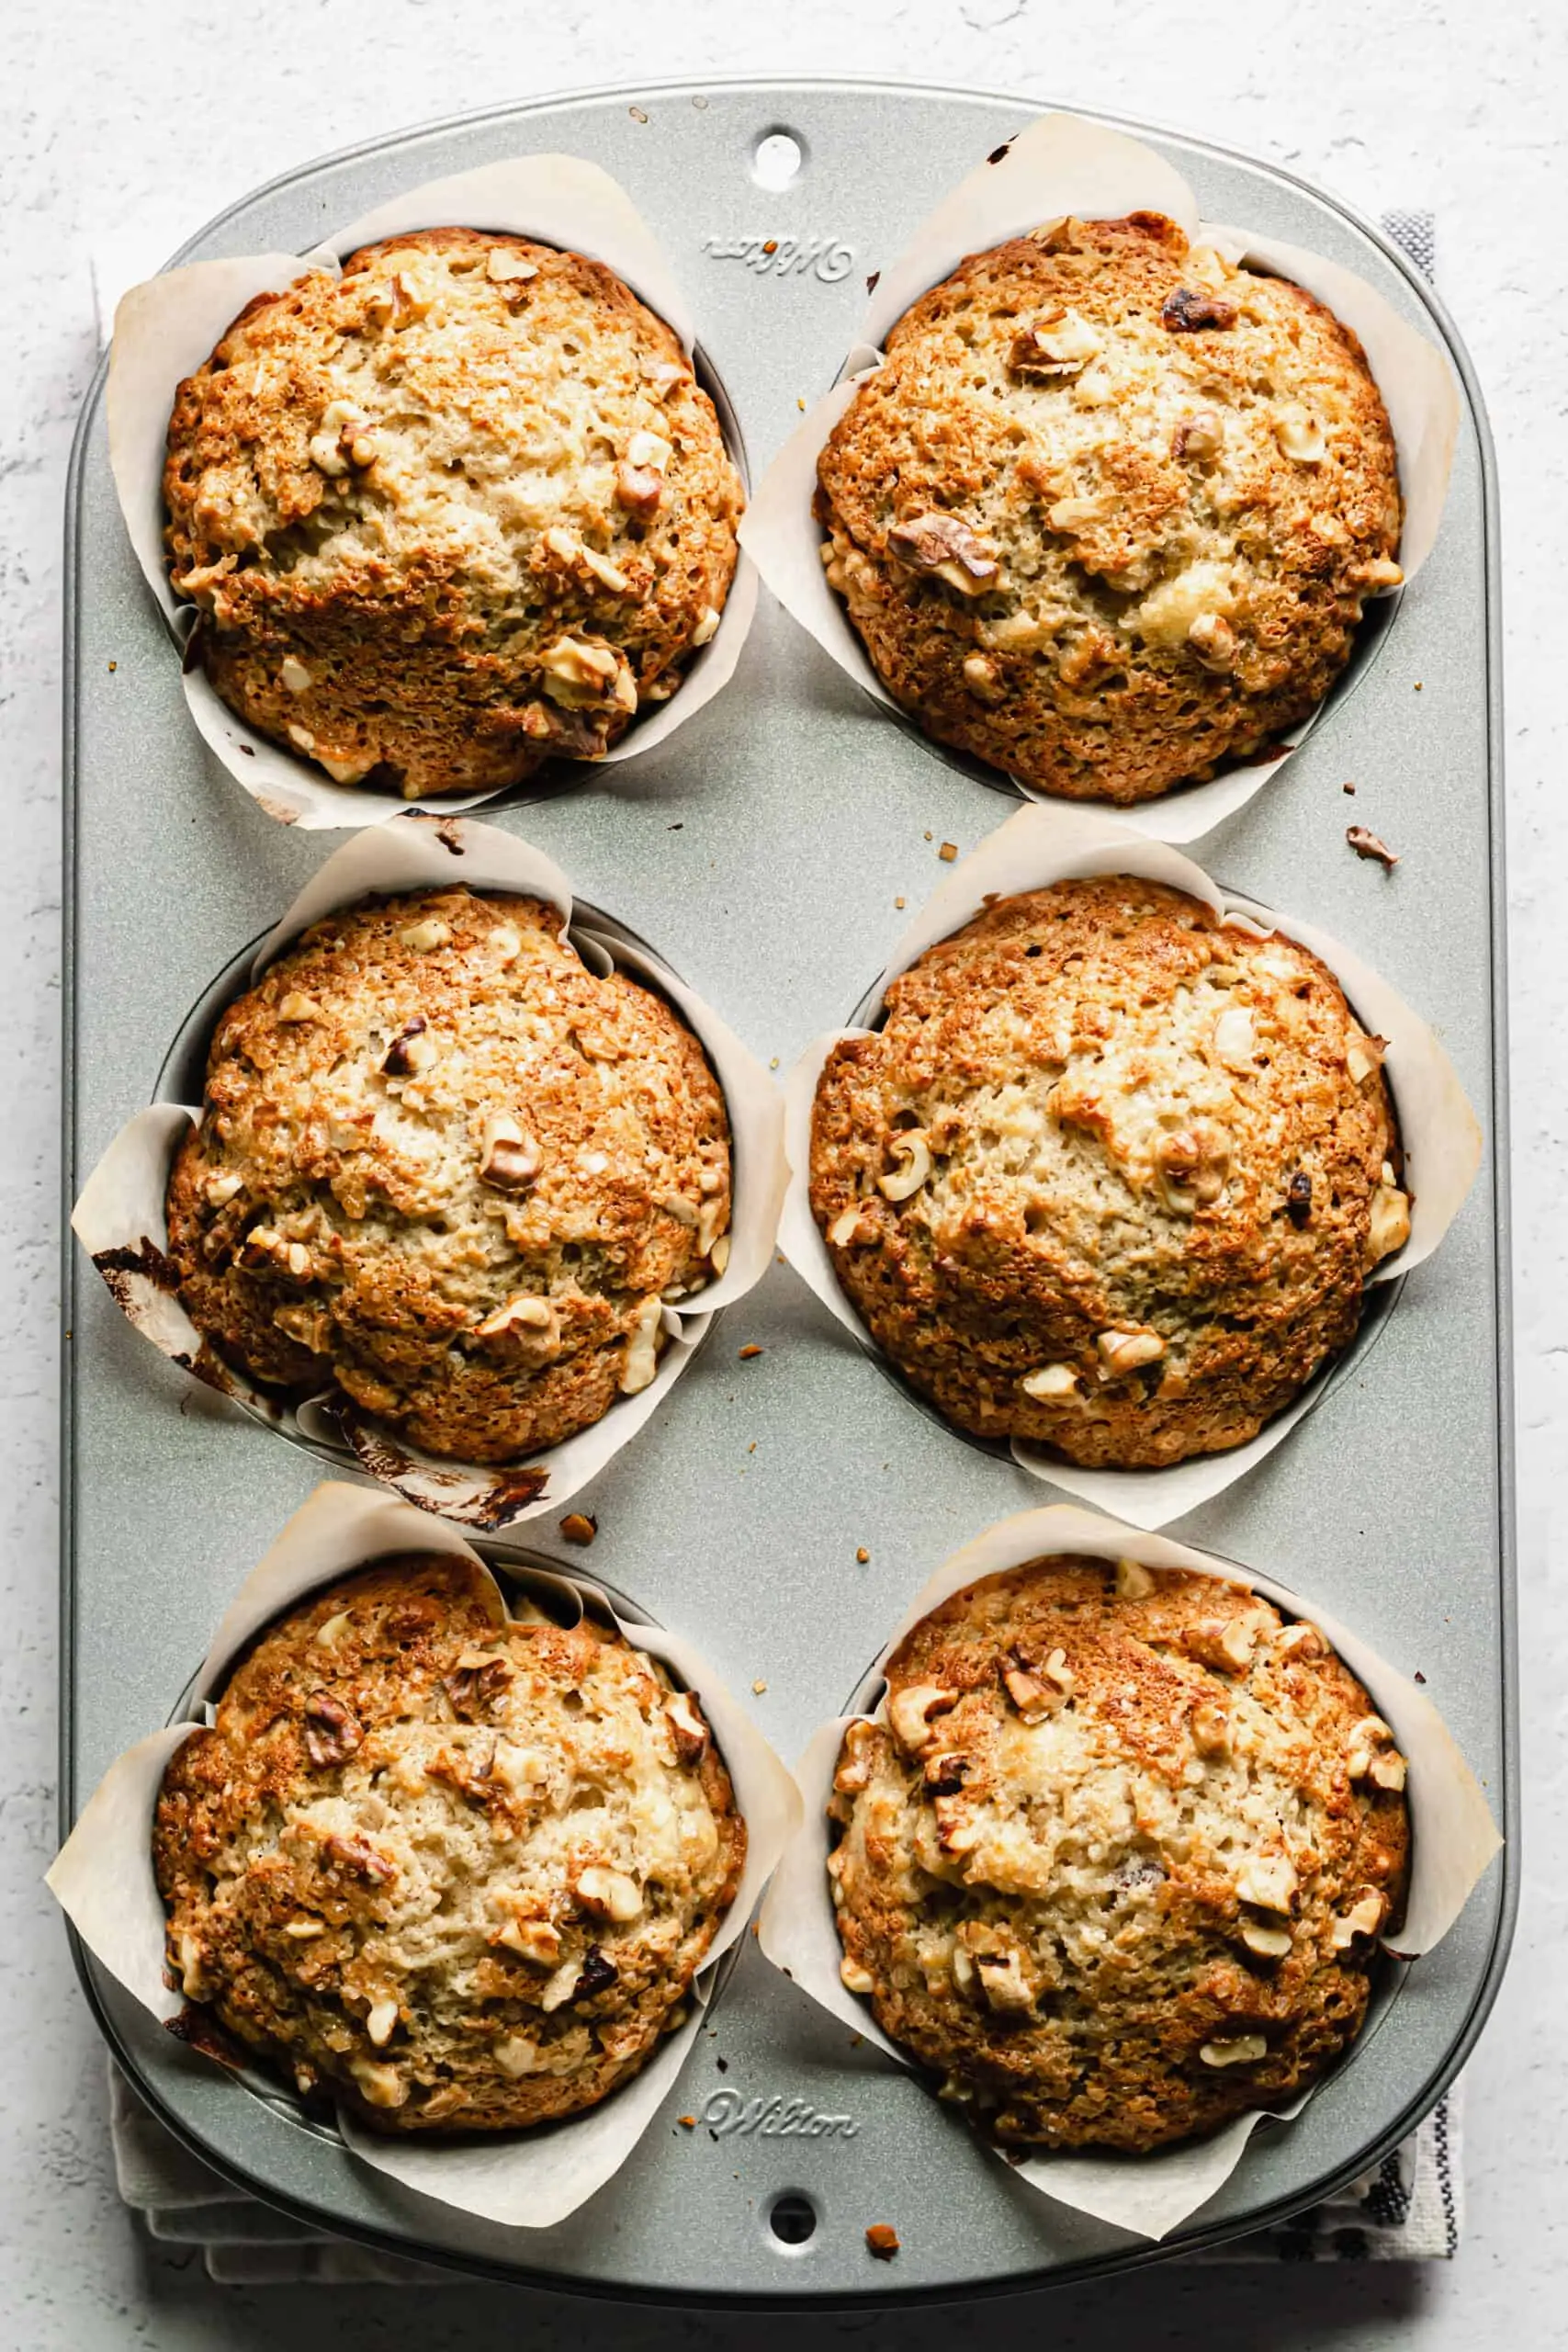 Baked banana nut muffins in the muffin pan.